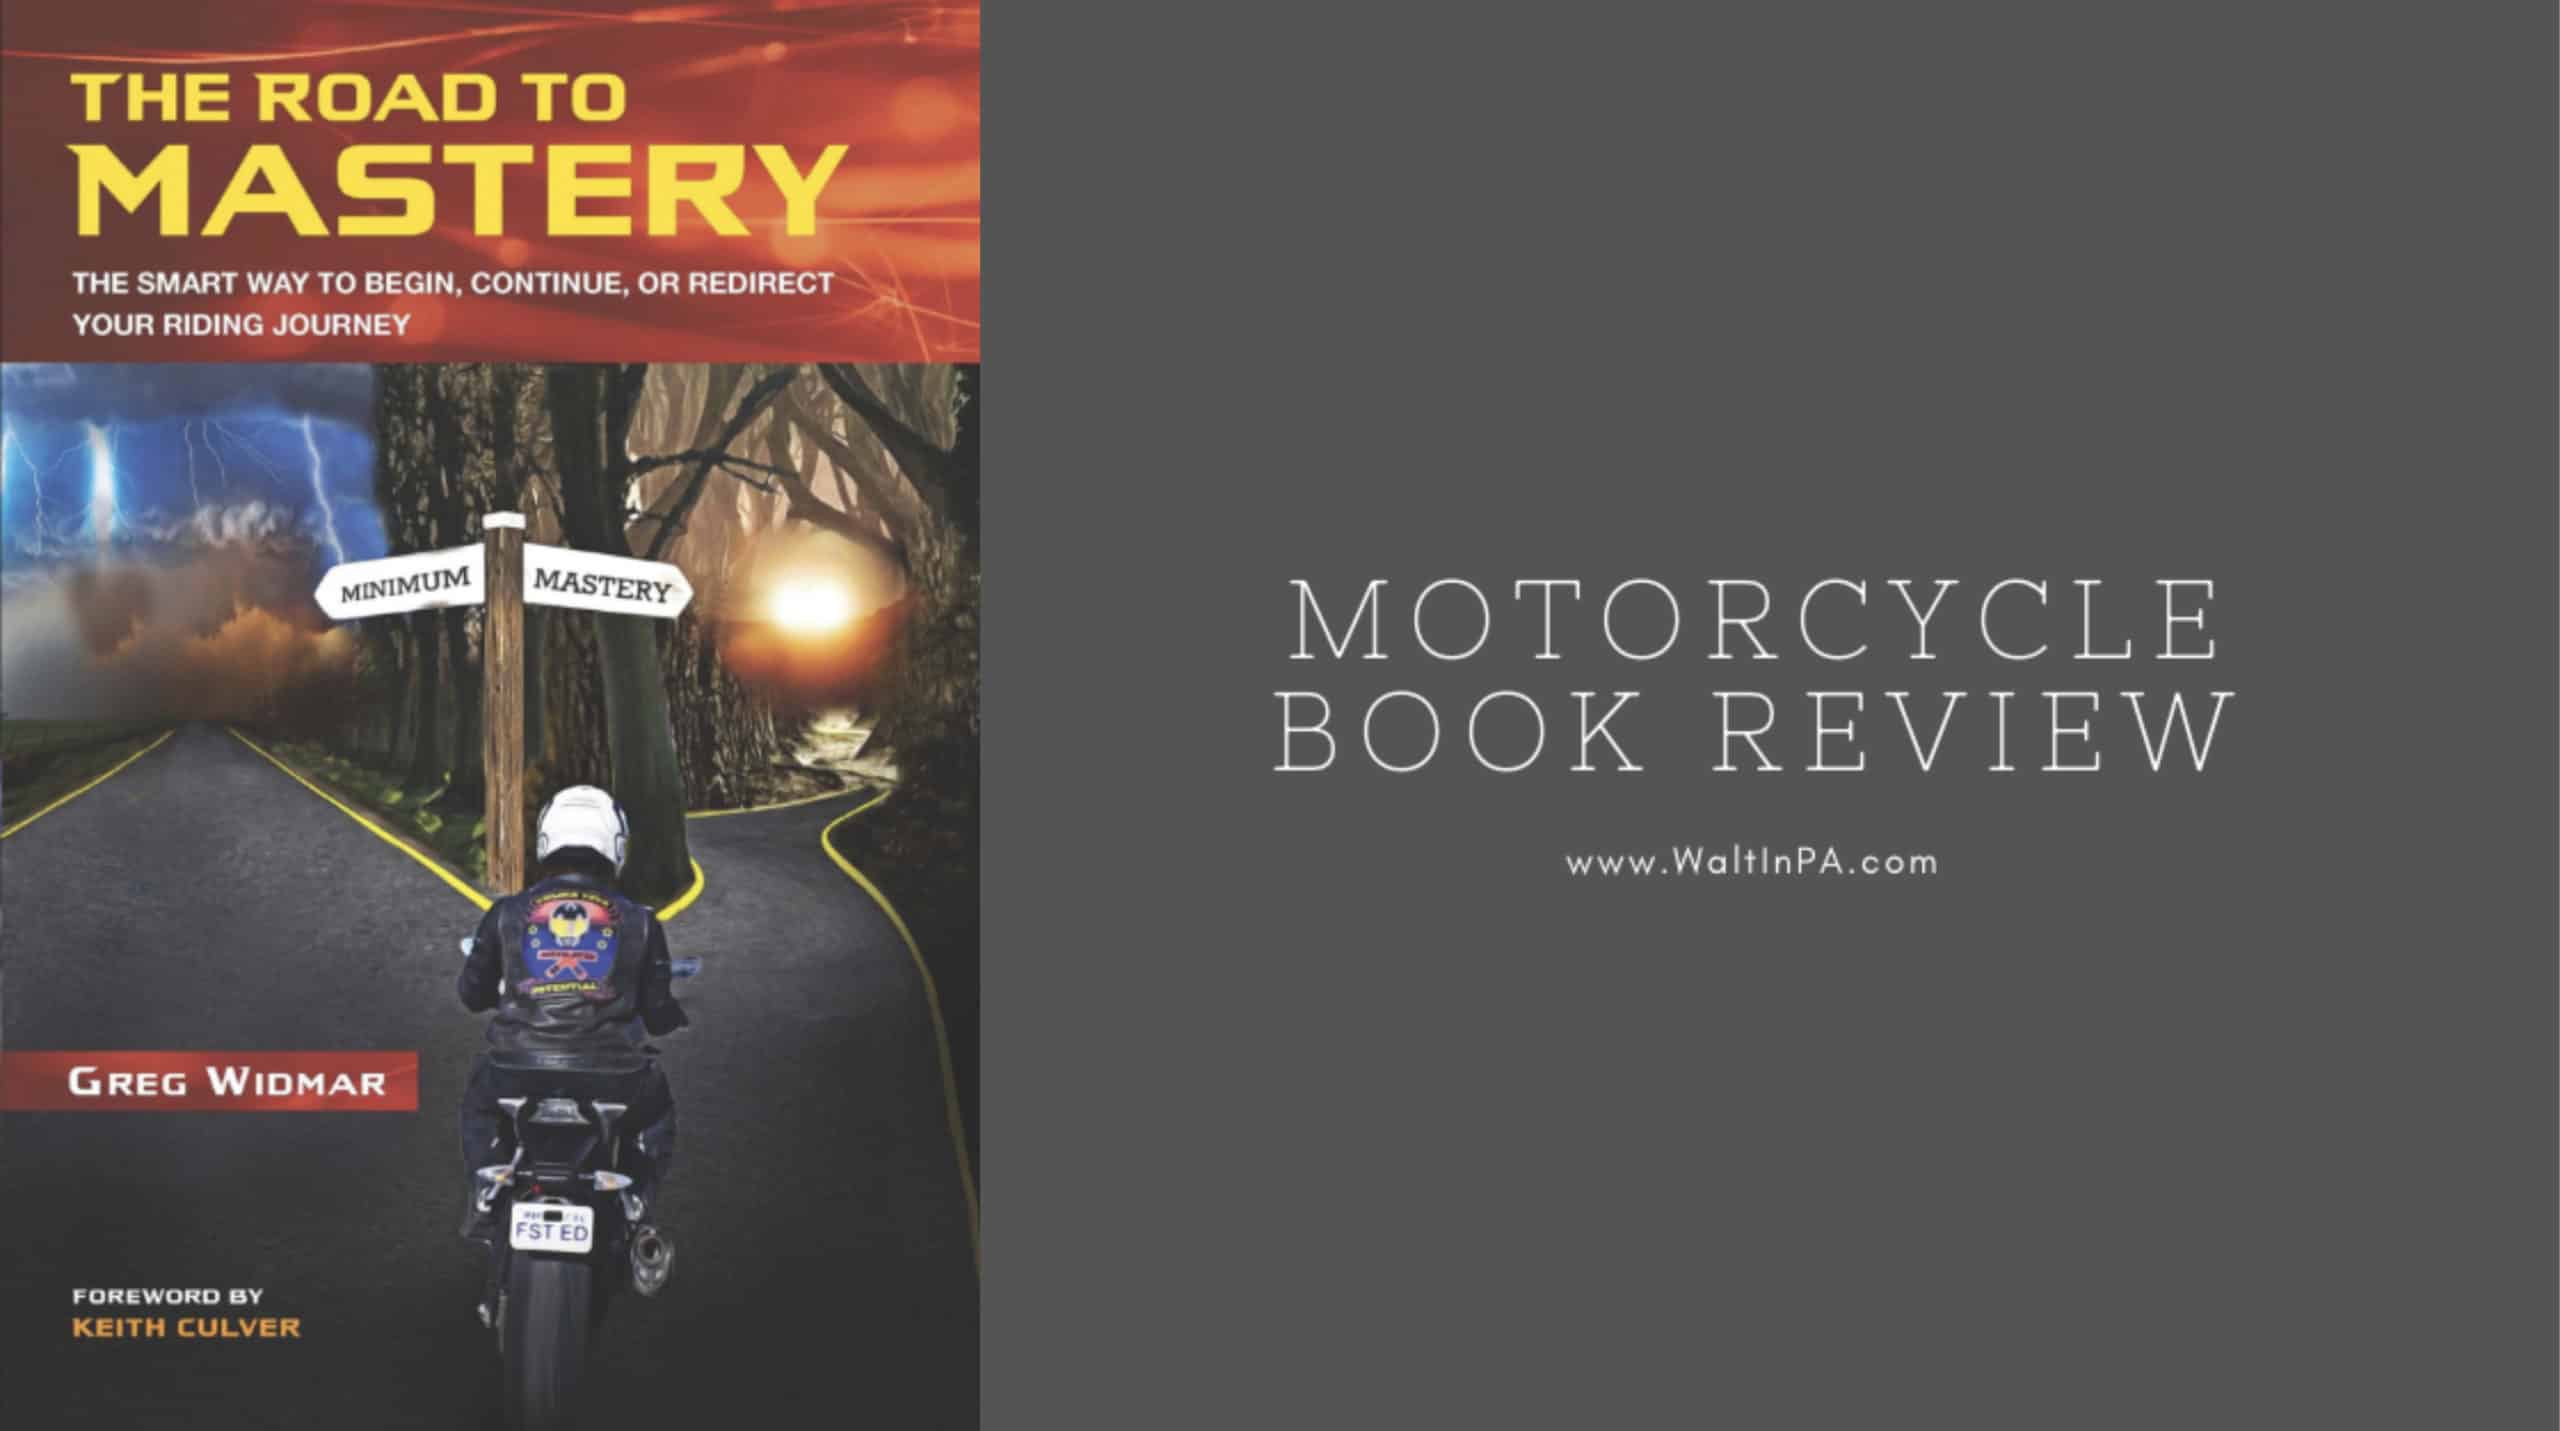 Motorcycle Book Review - Road to Mastery by Greg Widmar